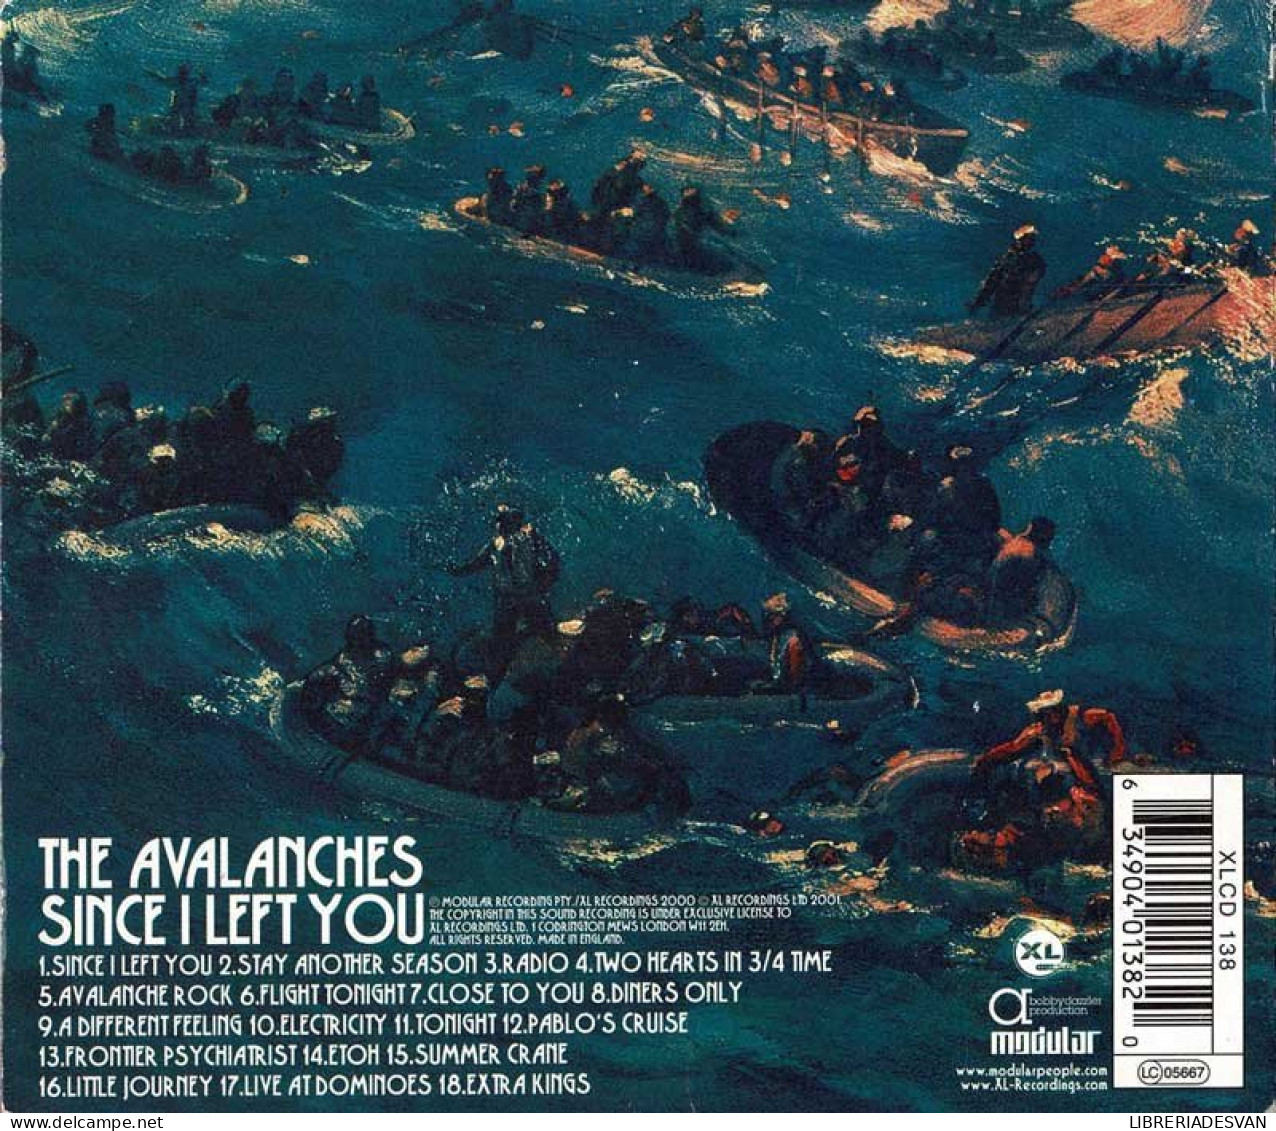 The Avalanches - Since I Left You. CD - Dance, Techno & House